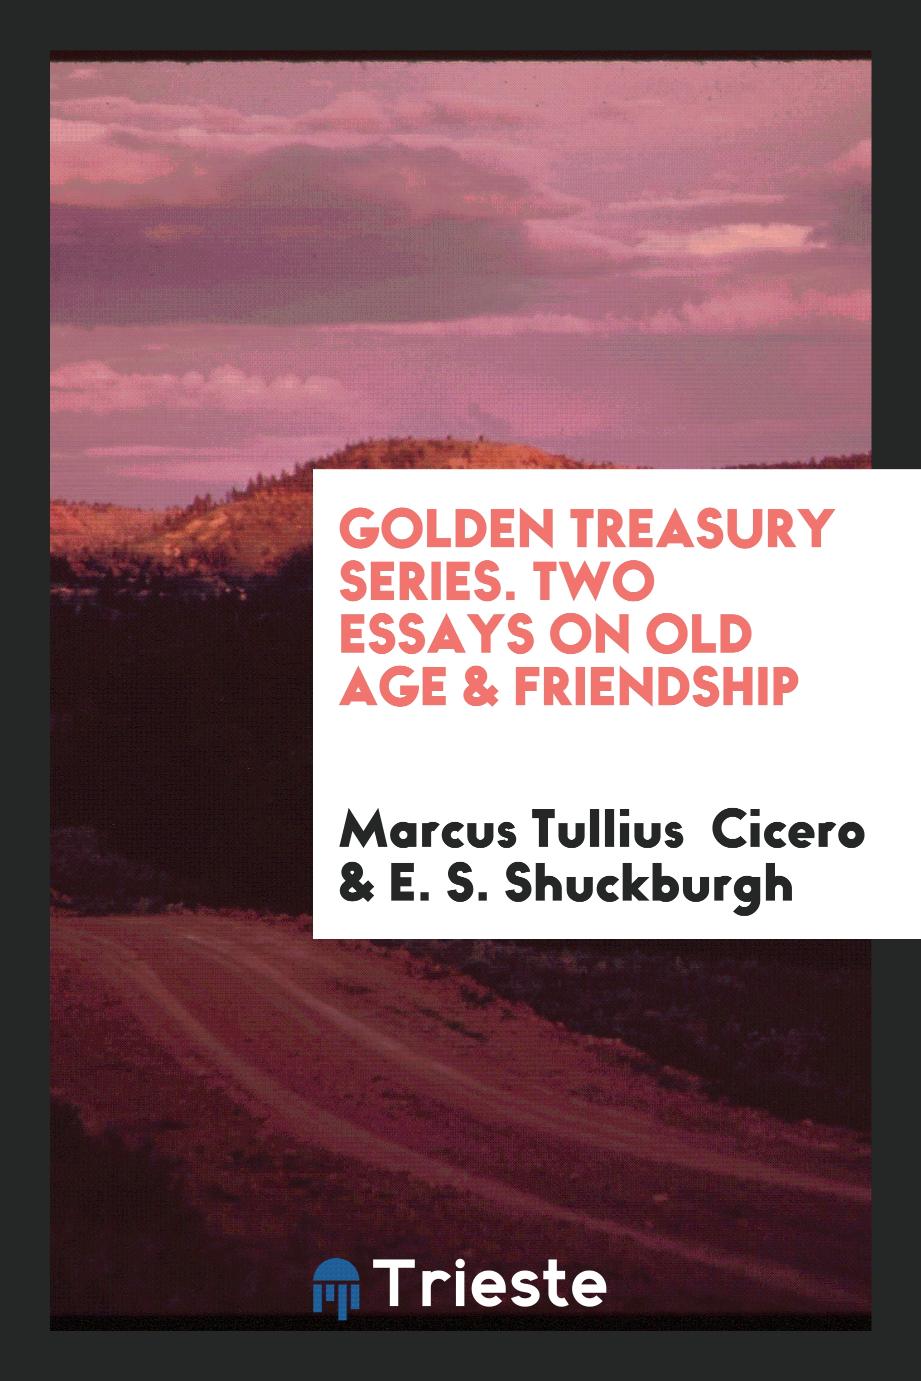 Golden Treasury Series. Two Essays on Old Age & Friendship